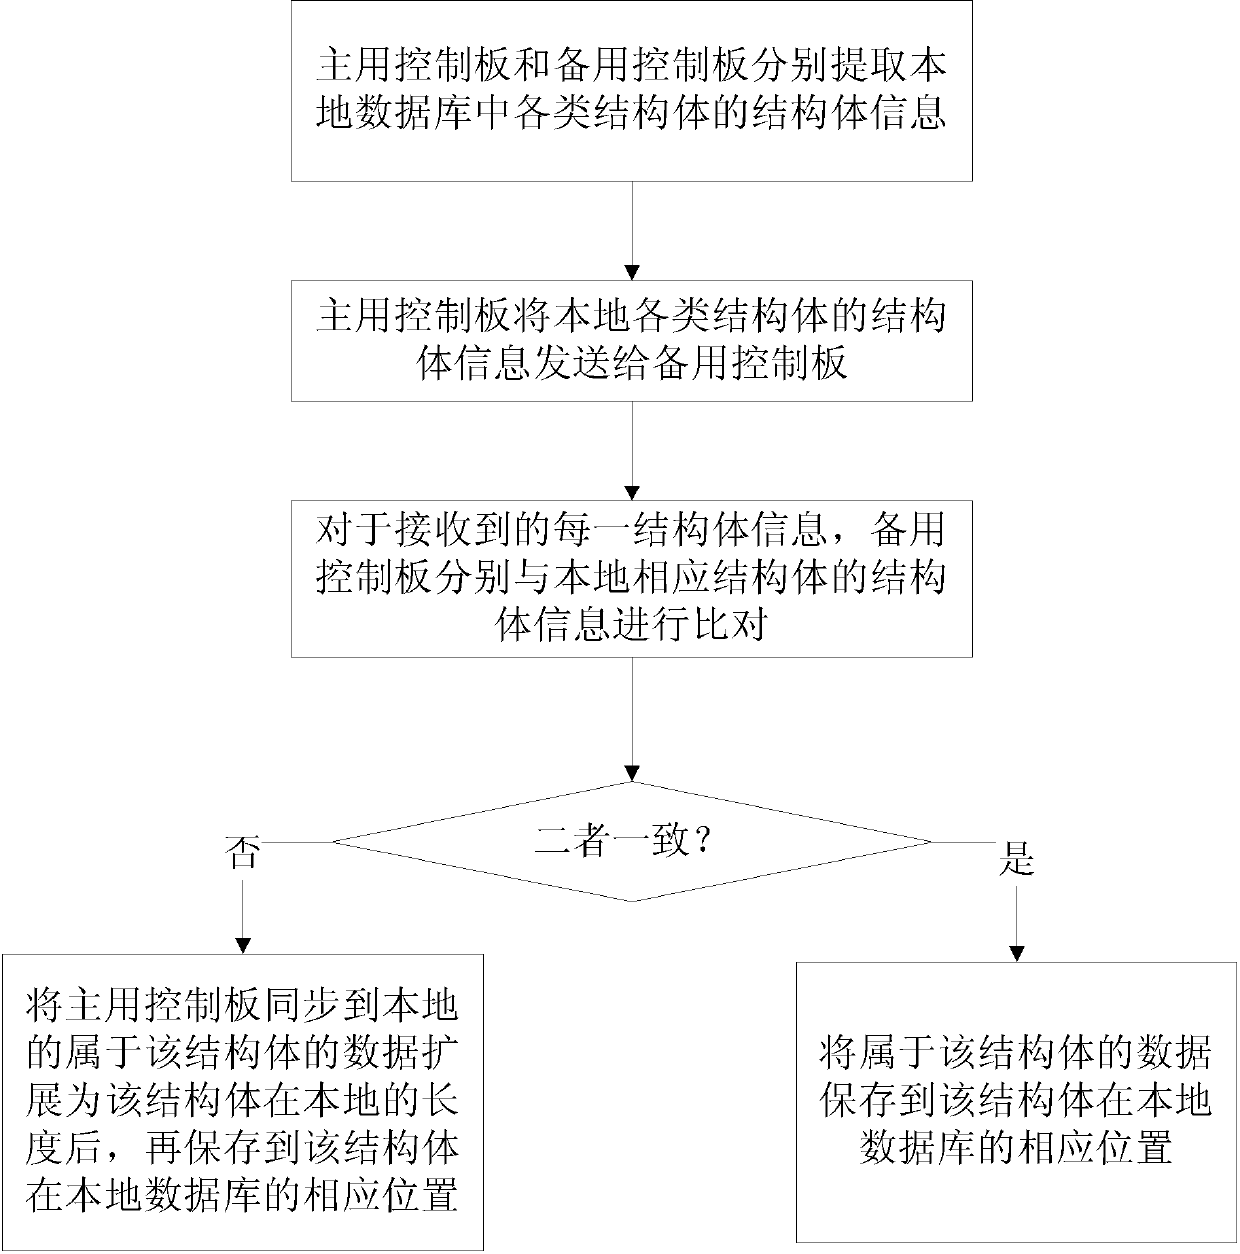 A data compatibility method, inter-board message compatibility method and corresponding system